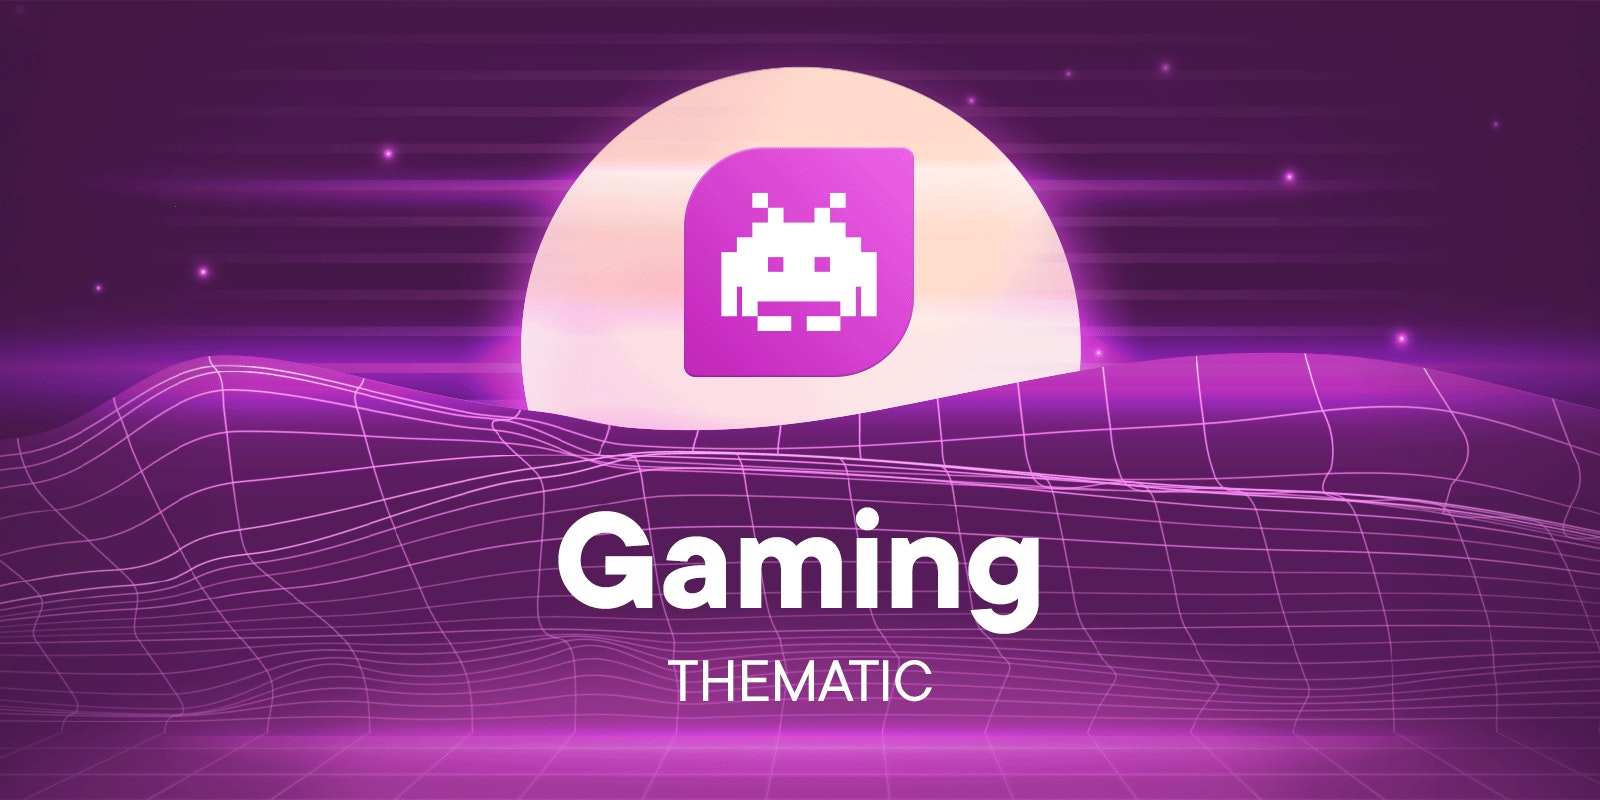 The Gaming Thematic is here